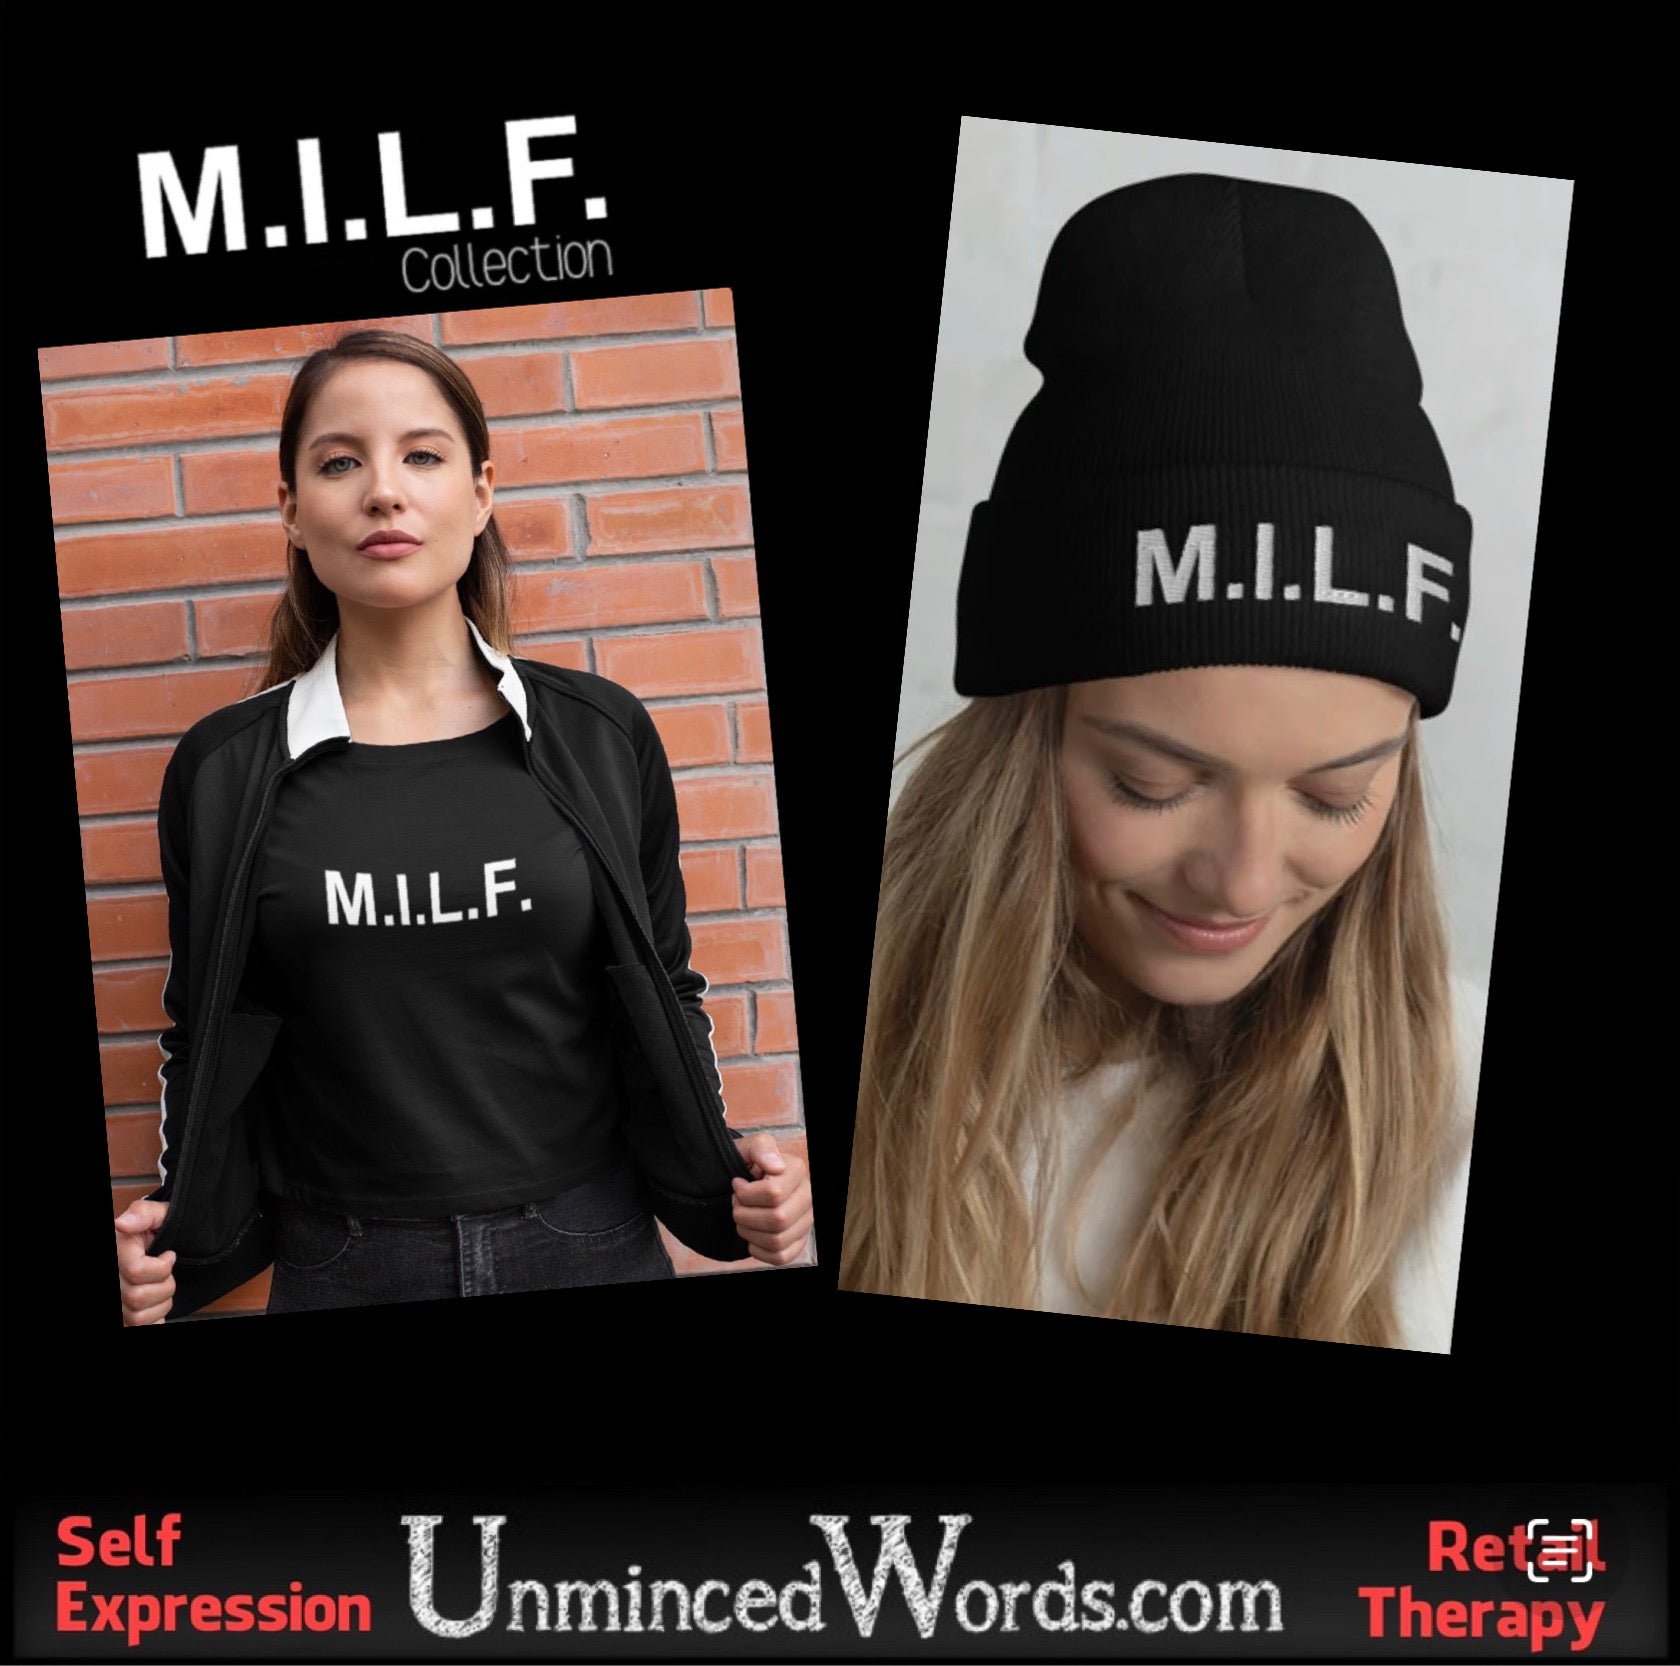 MILF-wear is here for you!